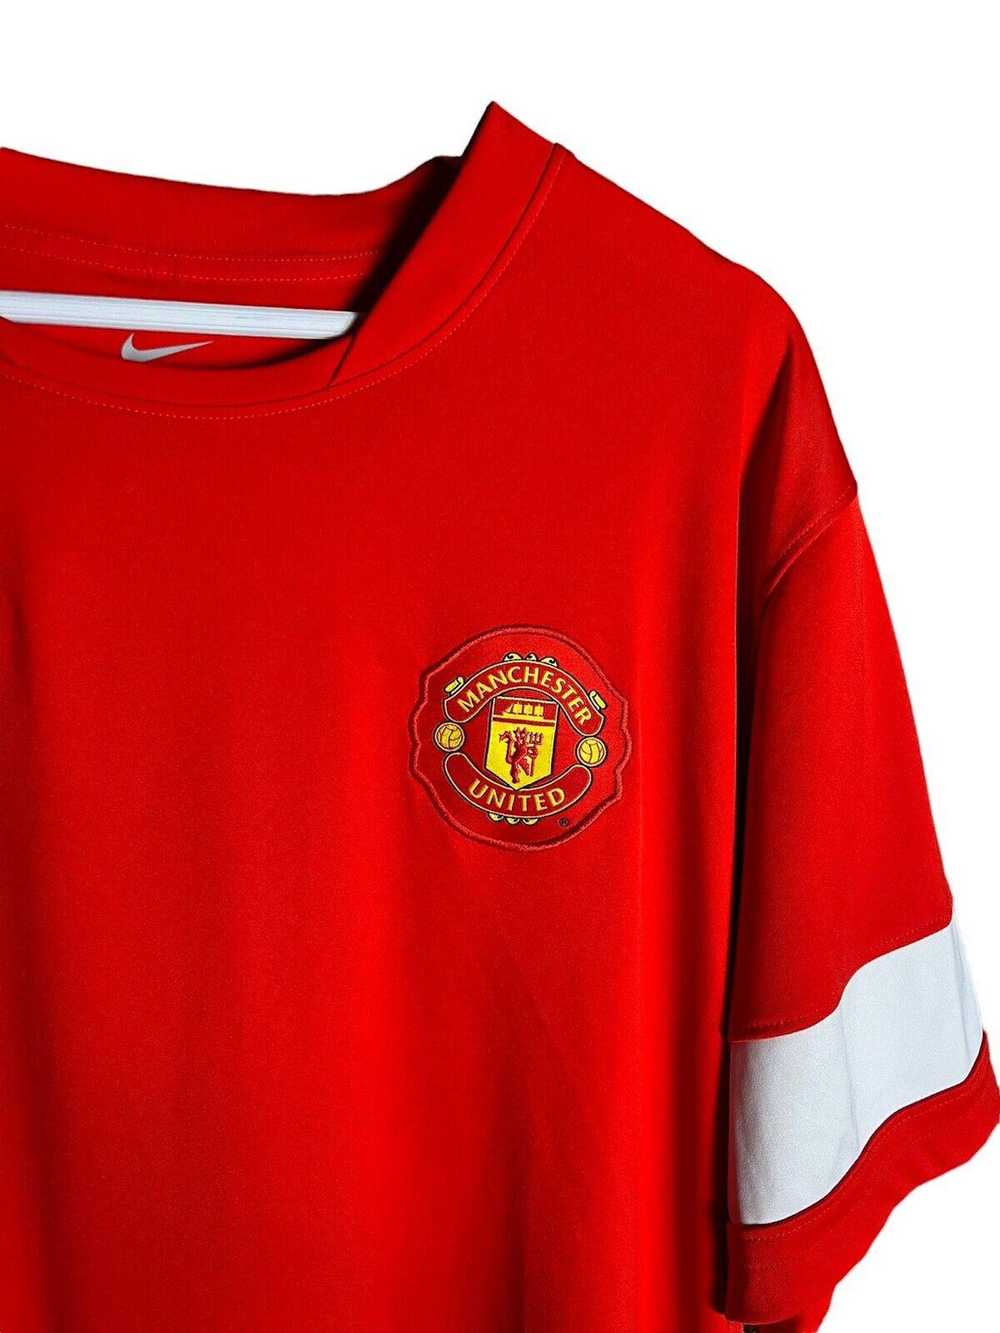 Nike 2010 Nike Manchester United Dr-Fit Jersey XL - image 2